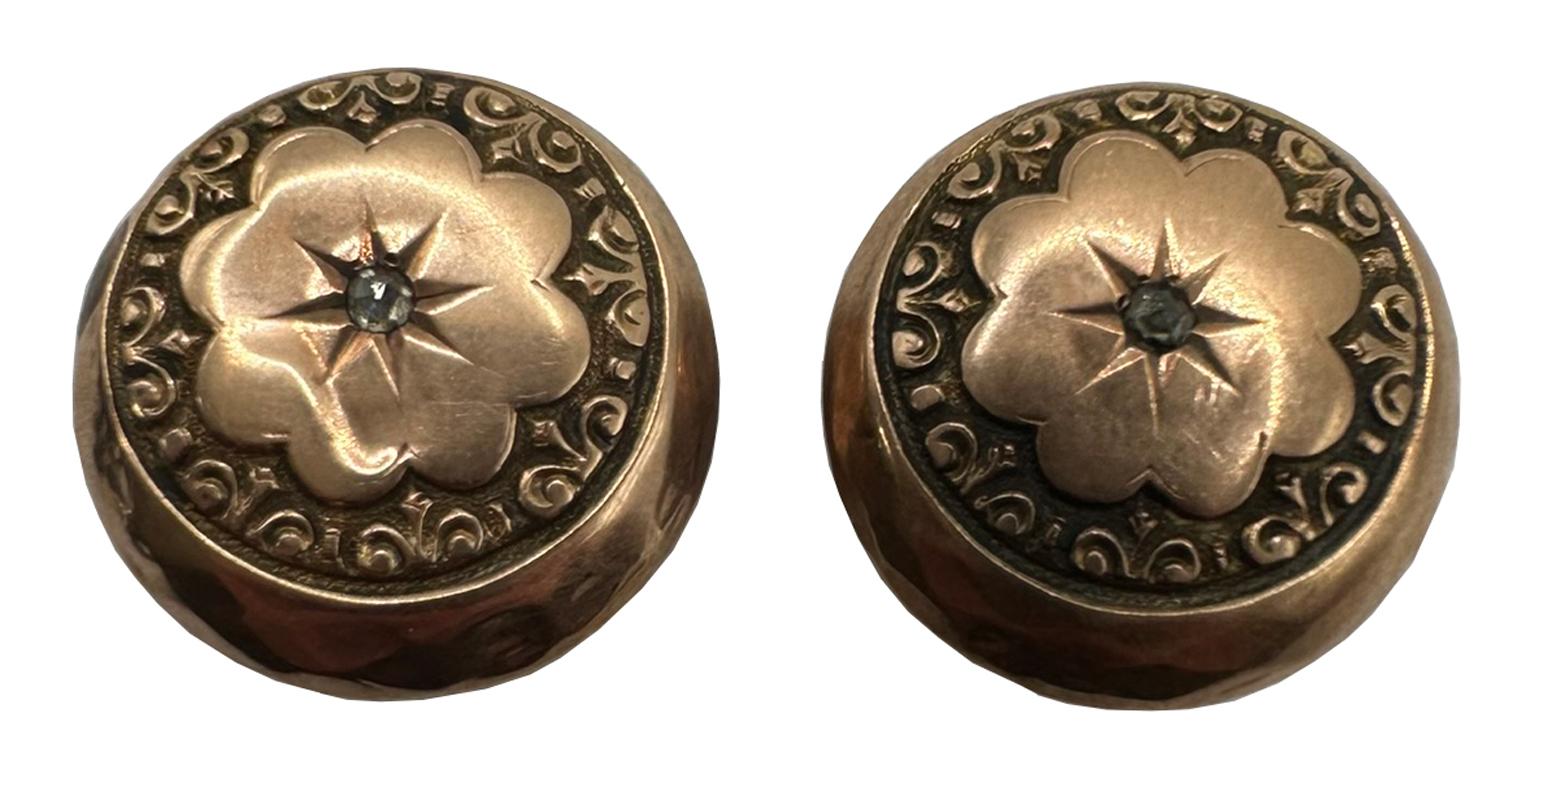 2. Antique Cufflinks with Diamond Pair
Each 0.84” dia (21.3mm) x 0.39” d  (9.9mm)
Each 0.135 oz (3.9g)
Late 1800’s round gold cufflinks with a diamond center. The center diamond is surrounded by a carved flower amidst delicately carved designs. The